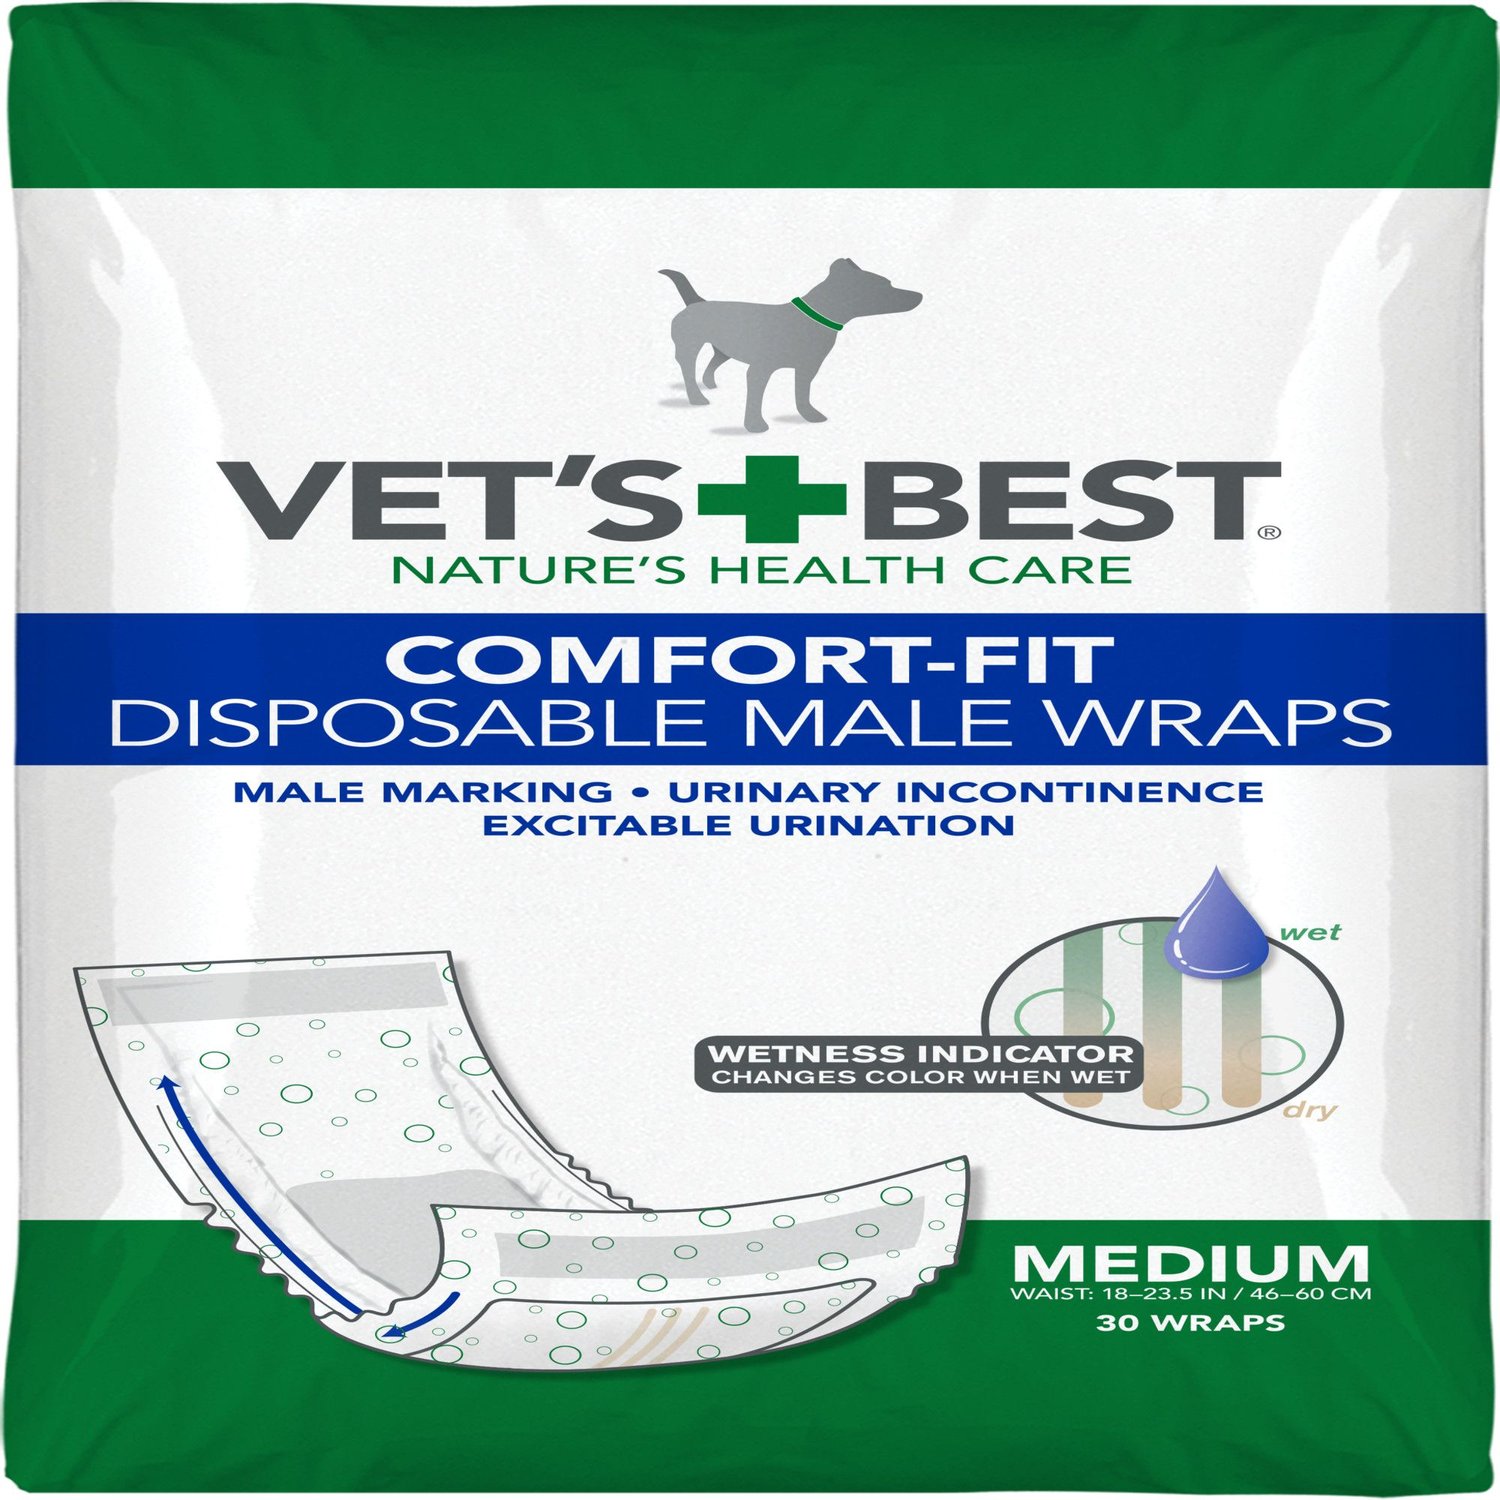 Simple Solution Disposable Dog Diapers for Male Dogs Male Wraps with Super Absorbent Leak-Proof Fit Excitable Urination or Male Marking Large 30 Count Incontinence